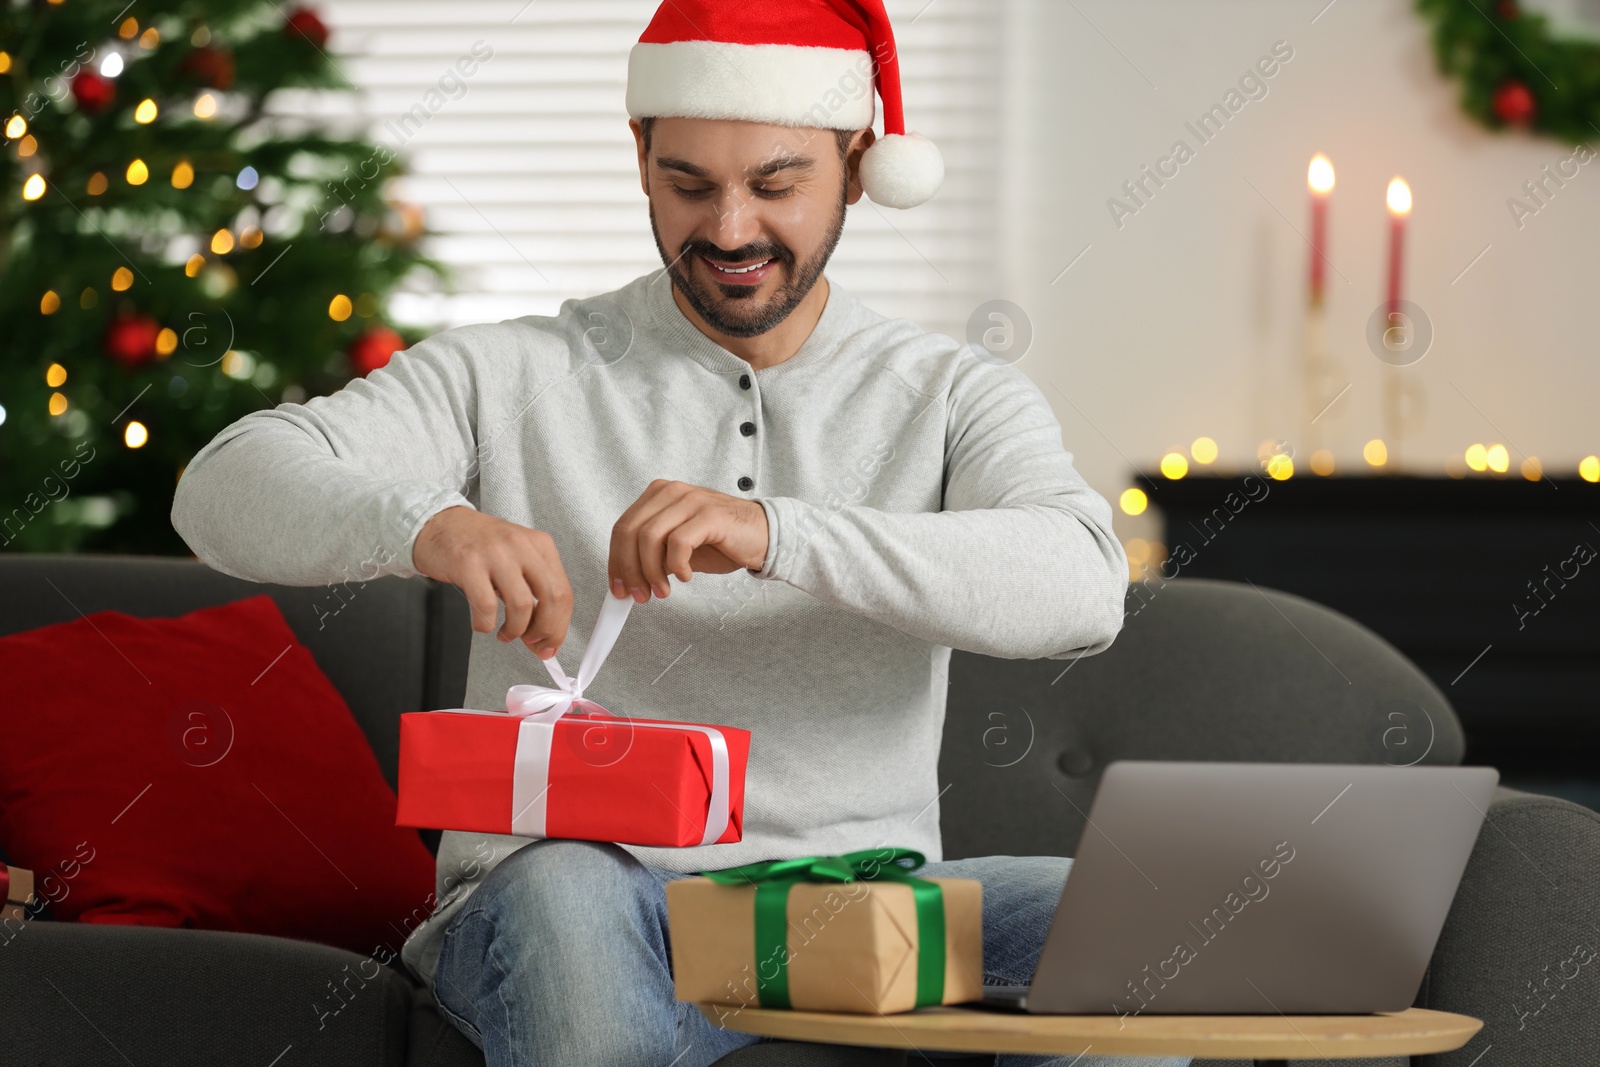 Photo of Celebrating Christmas online with exchanged by mail presents. Happy man in Santa hat opening gift box during video call on laptop at home